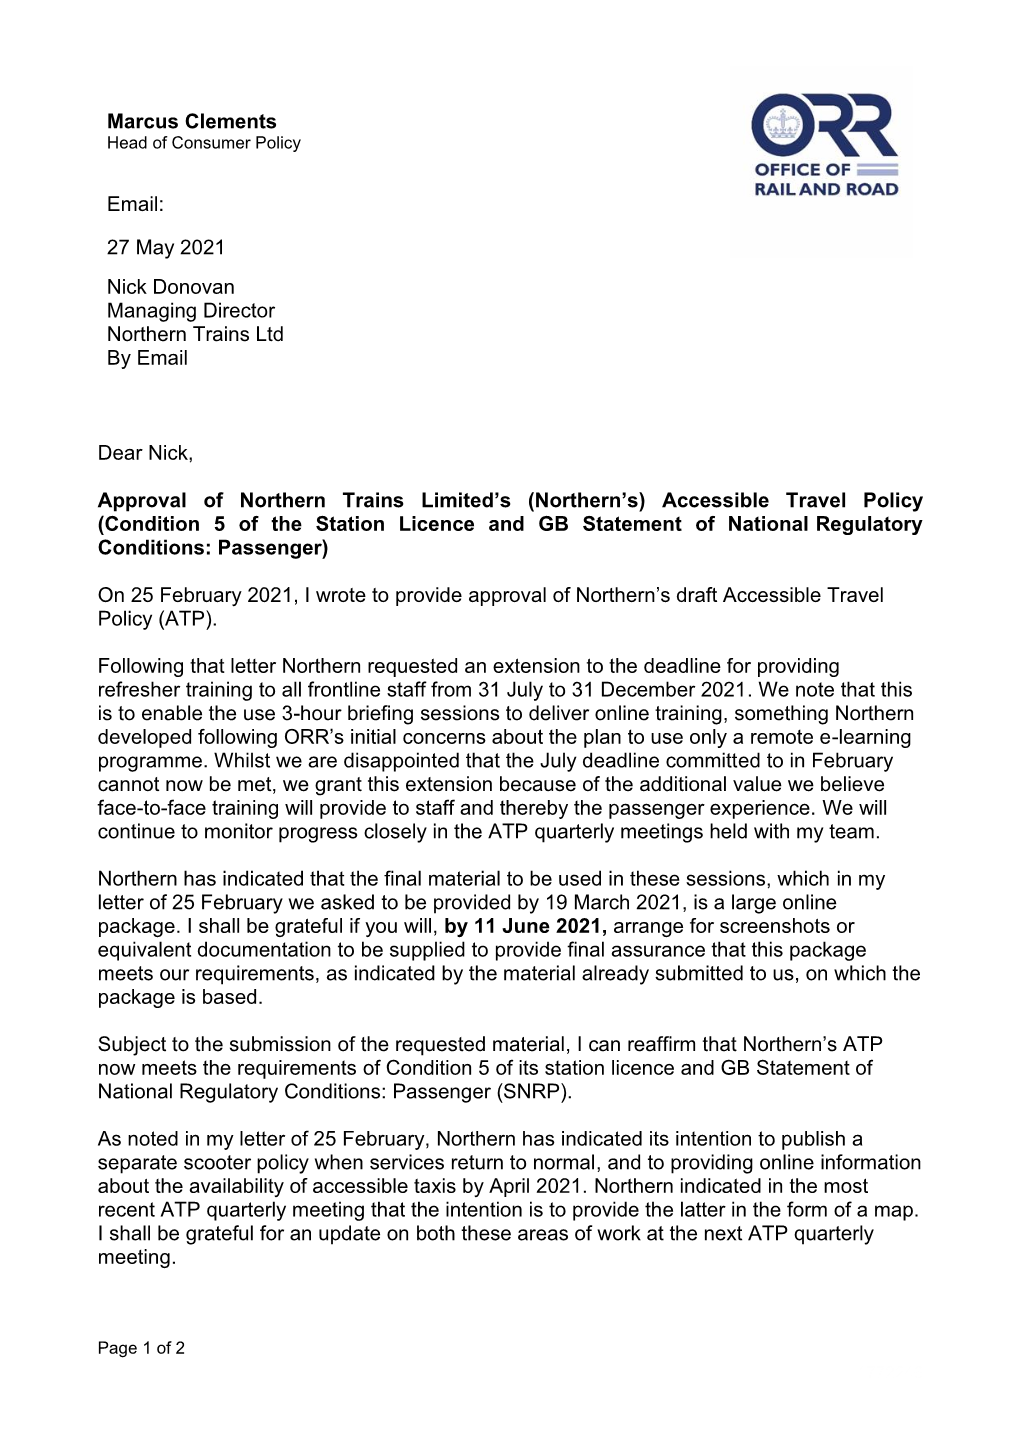 Northern Trains Limited's Accessible Travel Policy Approval Decision Letter and Documents at 27 May 2021